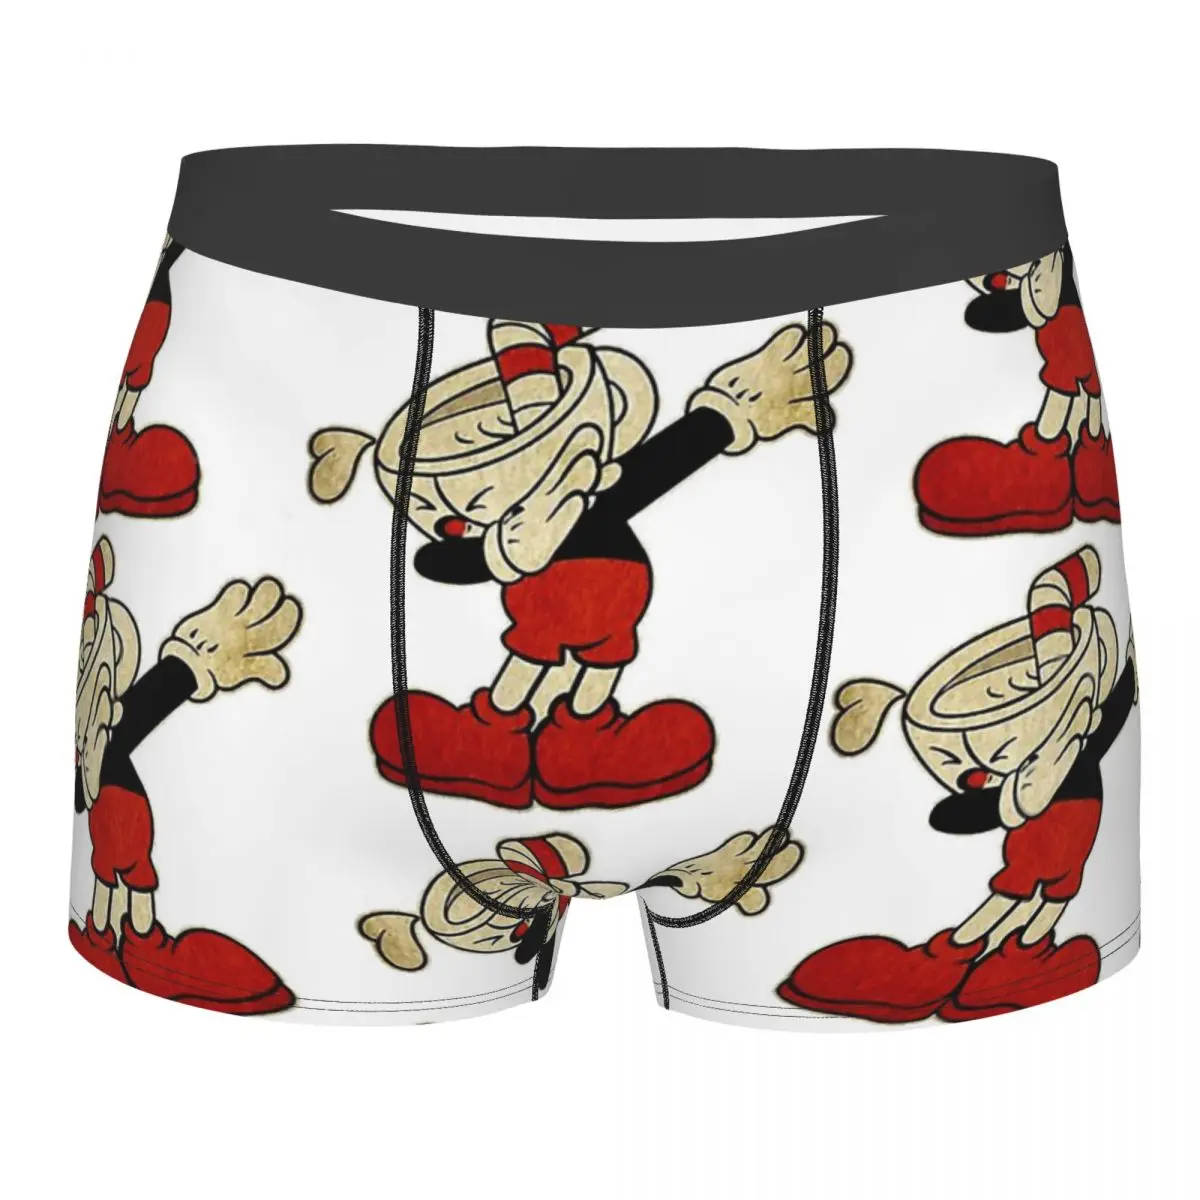 

Animated Cartoon Man's Boxer Briefs Underwear Cuphead Cala Maria Game Highly Breathable Top Quality Sexy Shorts Gift Idea